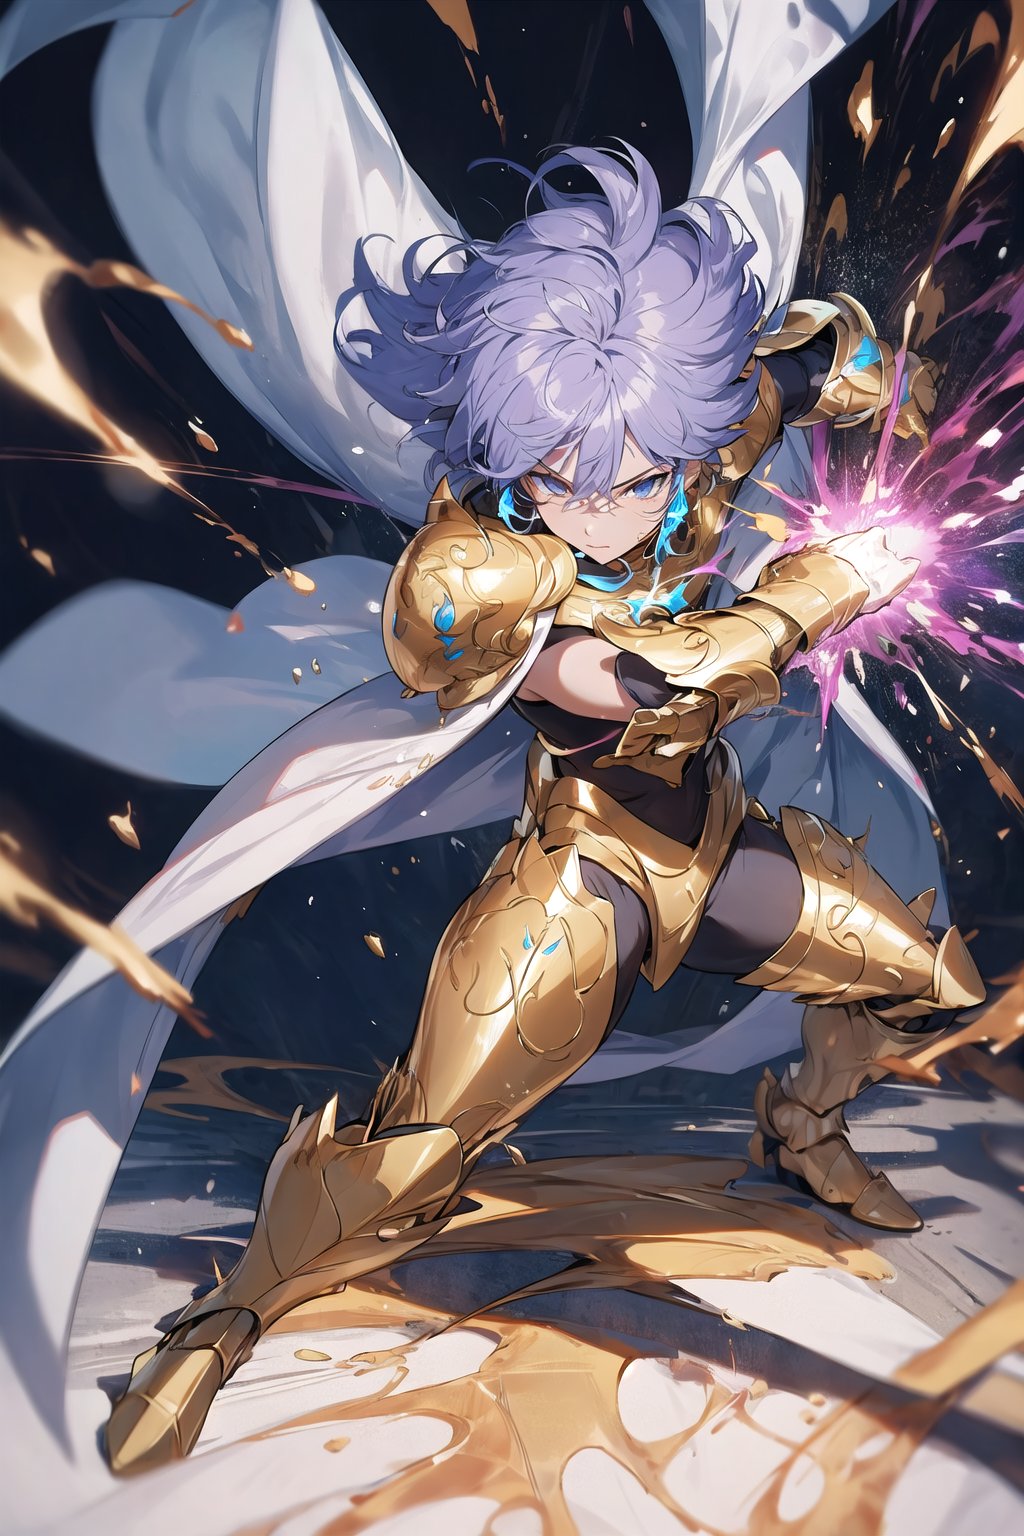 absurdres, highres, ultra detailed,Insane detail in face,  (boy:1.3), Gold Saint, Saint Seiya Style, paint splatter, expressive drips, random patterns, energetic movement, bold colors, dynamic texture, spontaneous creativity, Gold Armor, Full body armor, no helmet, Zodiac Knights, White long cape, pastel purple hair, Fighting pose,Pokemon Gotcha Style, gold gloves, long hair, white cape, messy_hair